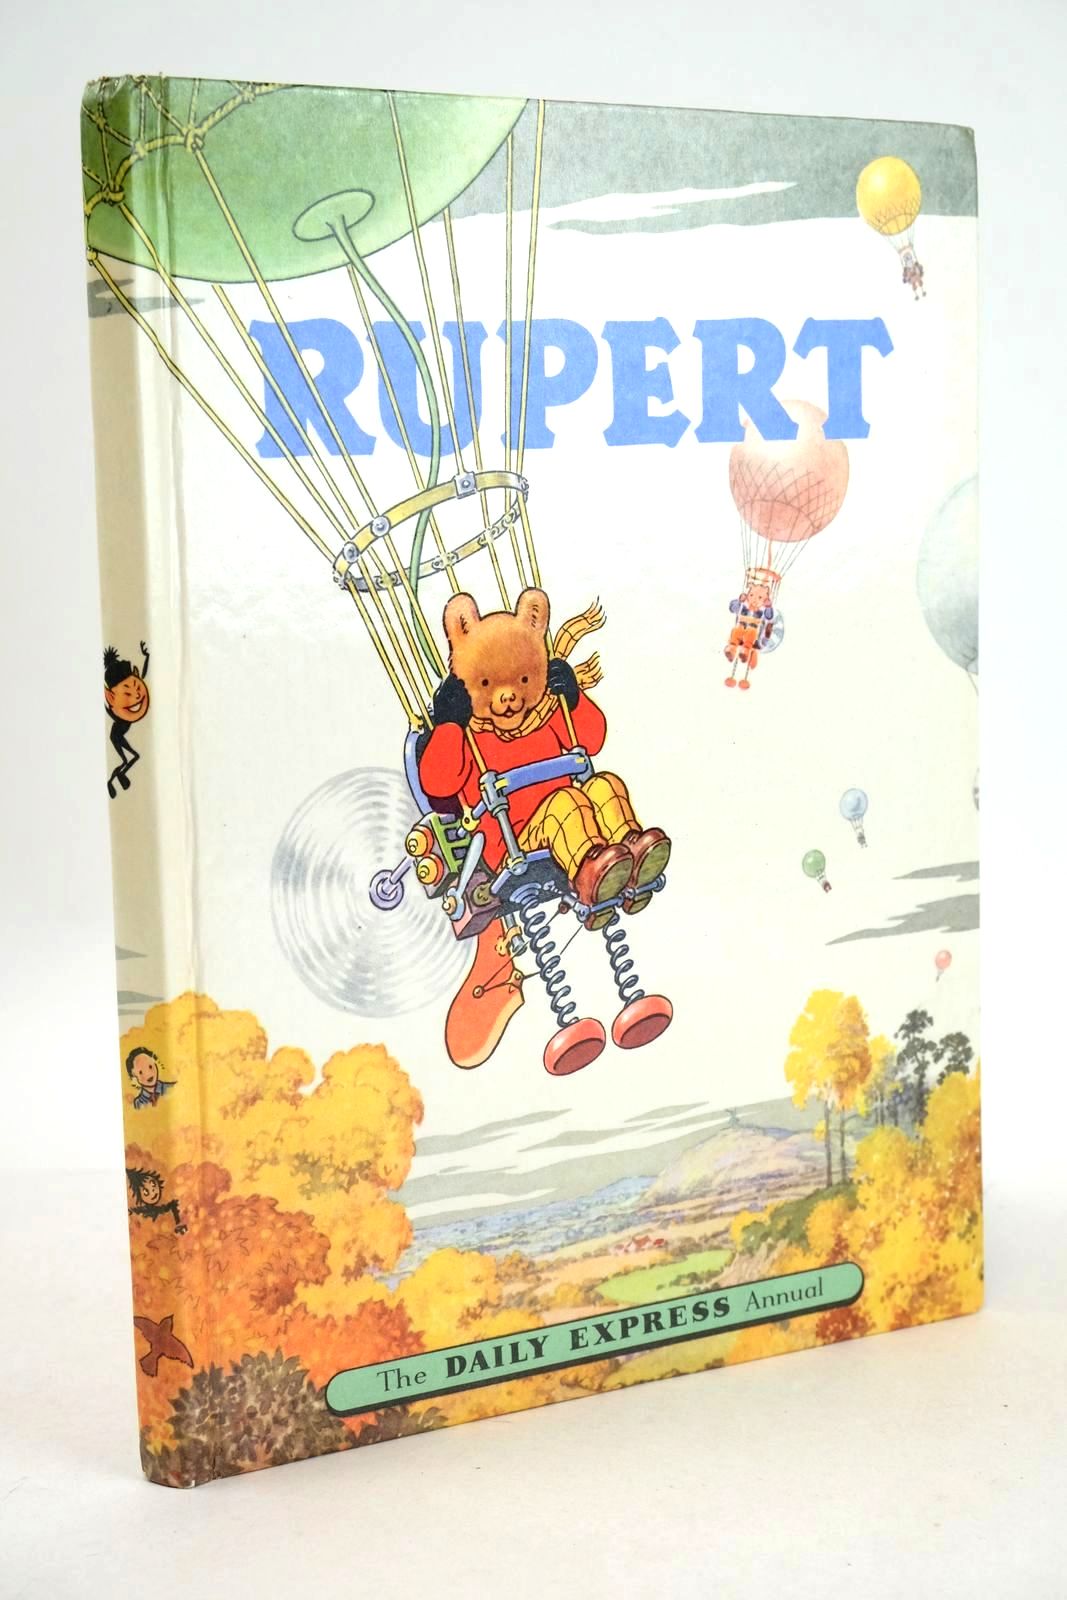 Photo of RUPERT ANNUAL 1957 written by Bestall, Alfred illustrated by Bestall, Alfred published by Daily Express (STOCK CODE: 1326451)  for sale by Stella & Rose's Books